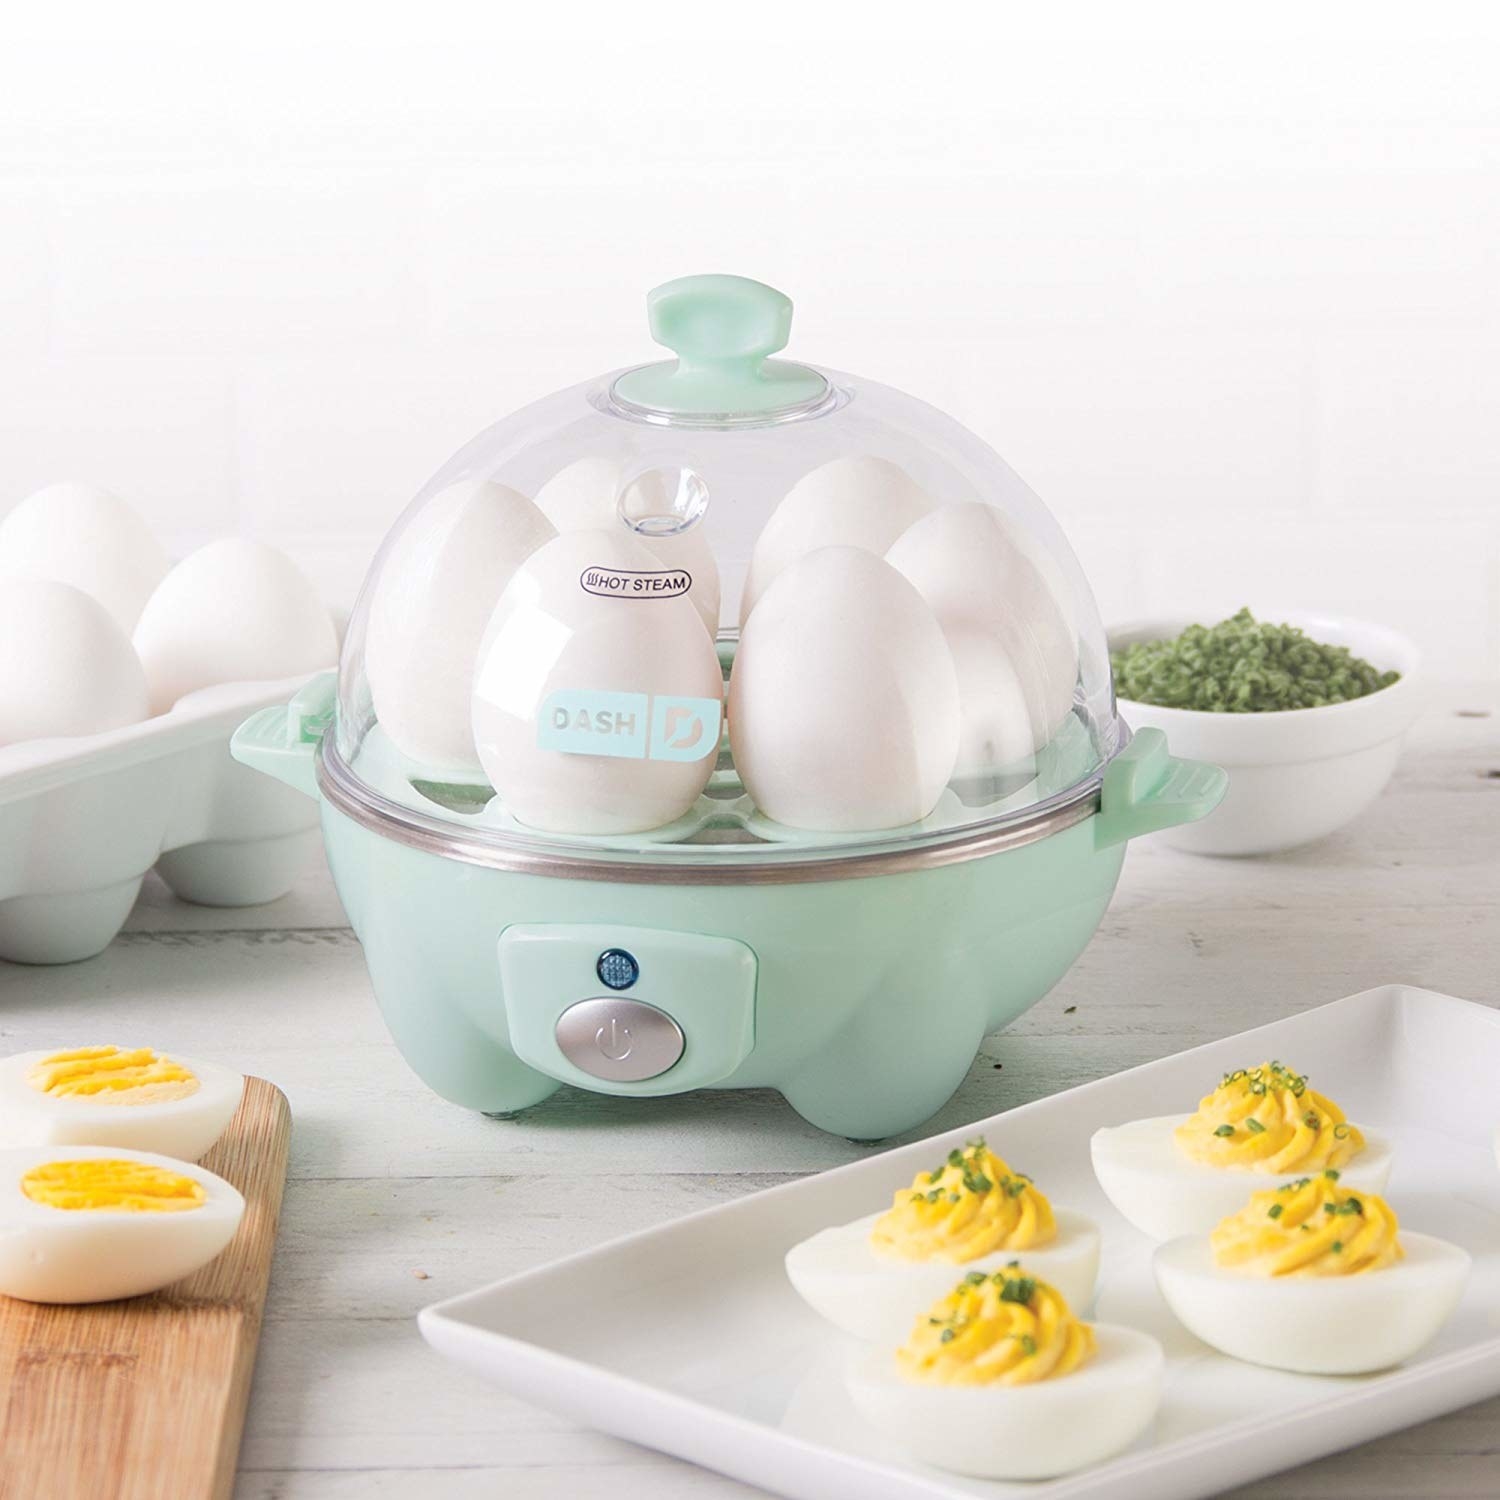 the miny colored egg cooker surrounded by deviled eggs